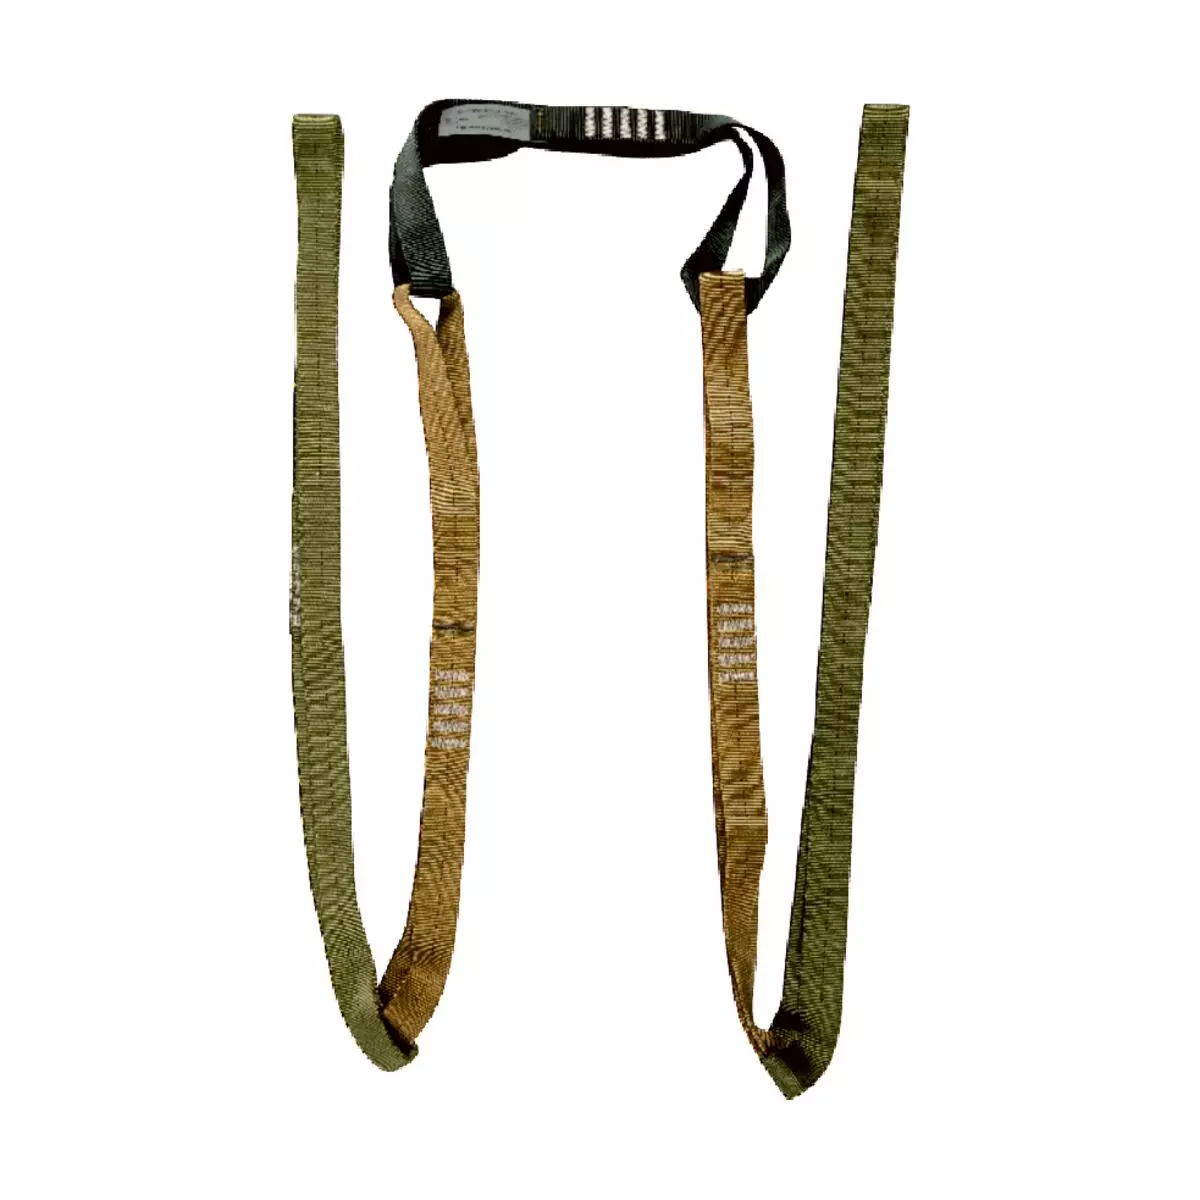 TREMA Rescue Sling (TRS)